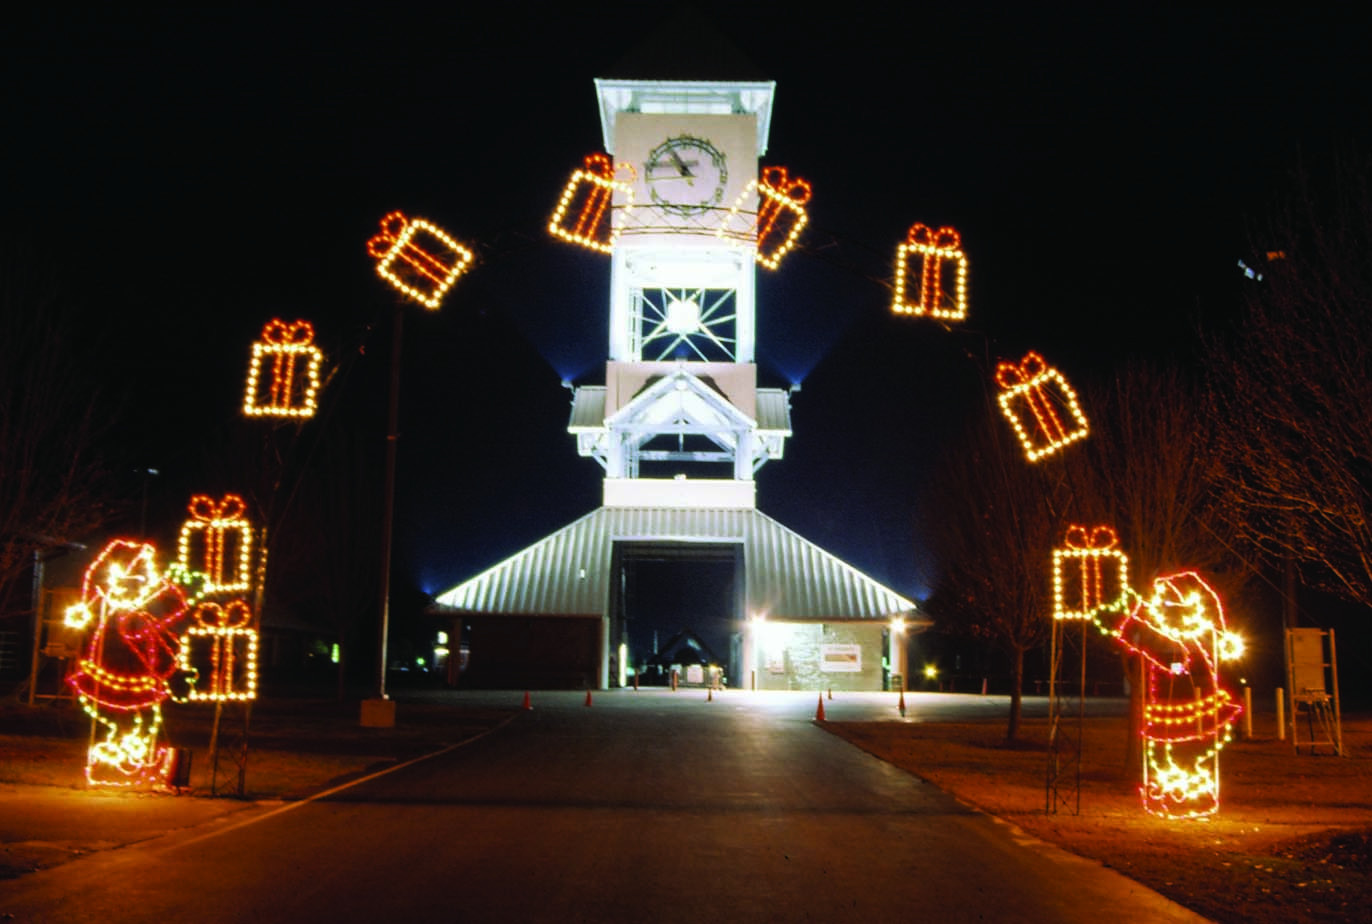 Animated Outdoor Christmas Decorations
 mercial Lighted Arches for Drive Thru Parks and City